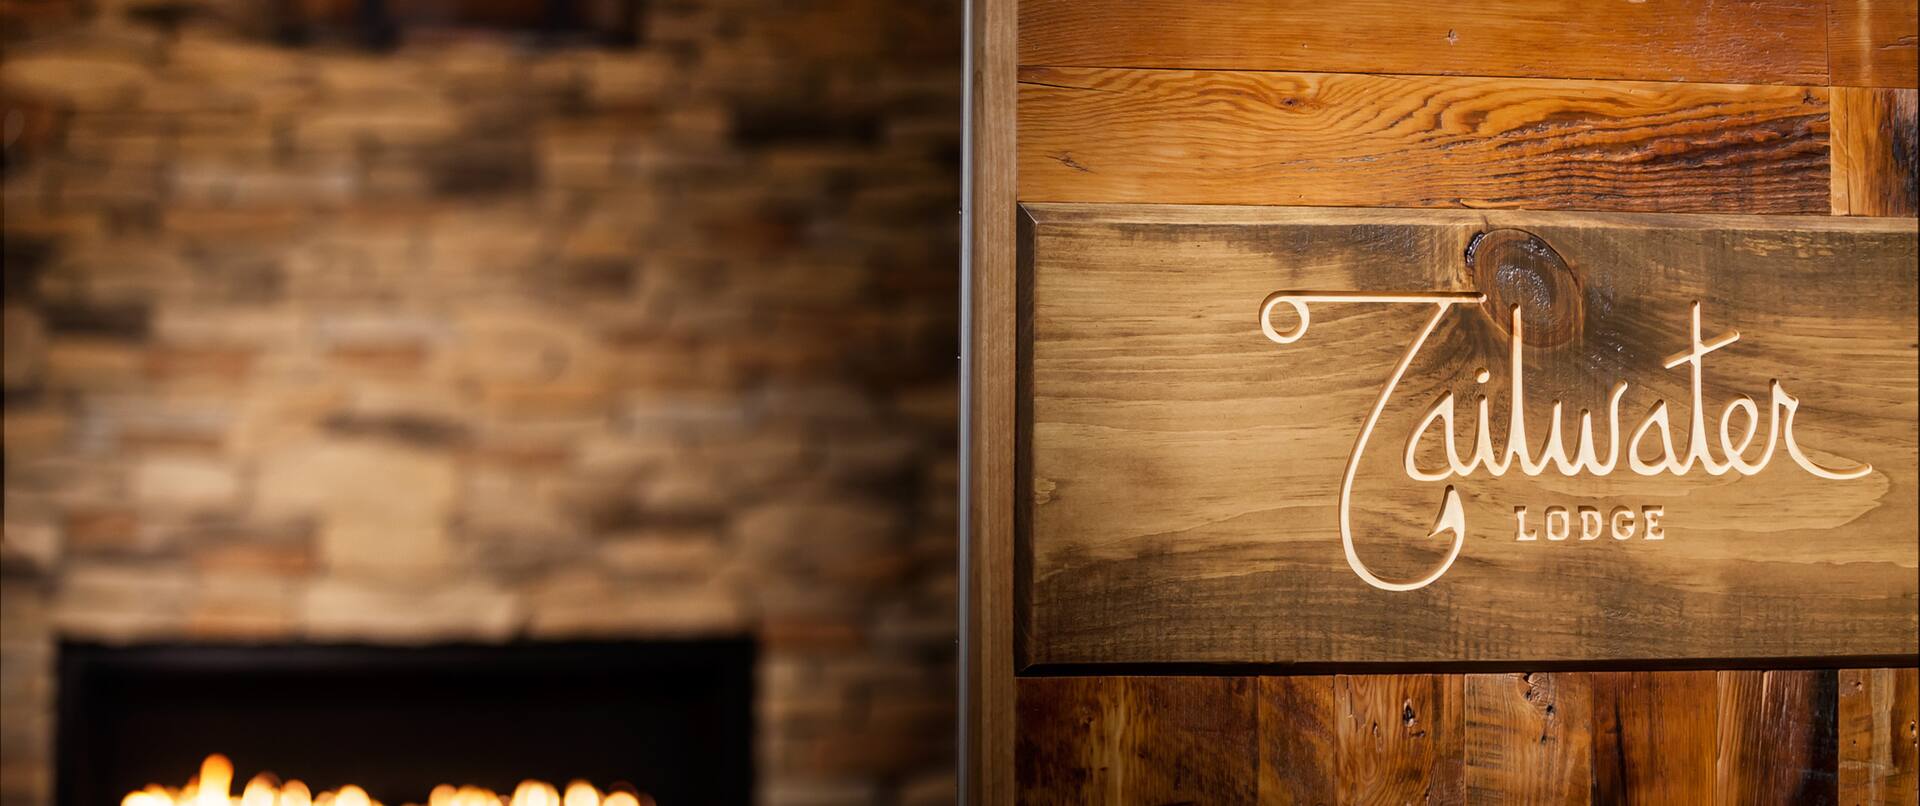 Tailwater Lodge Sign And Lobby Fireplace